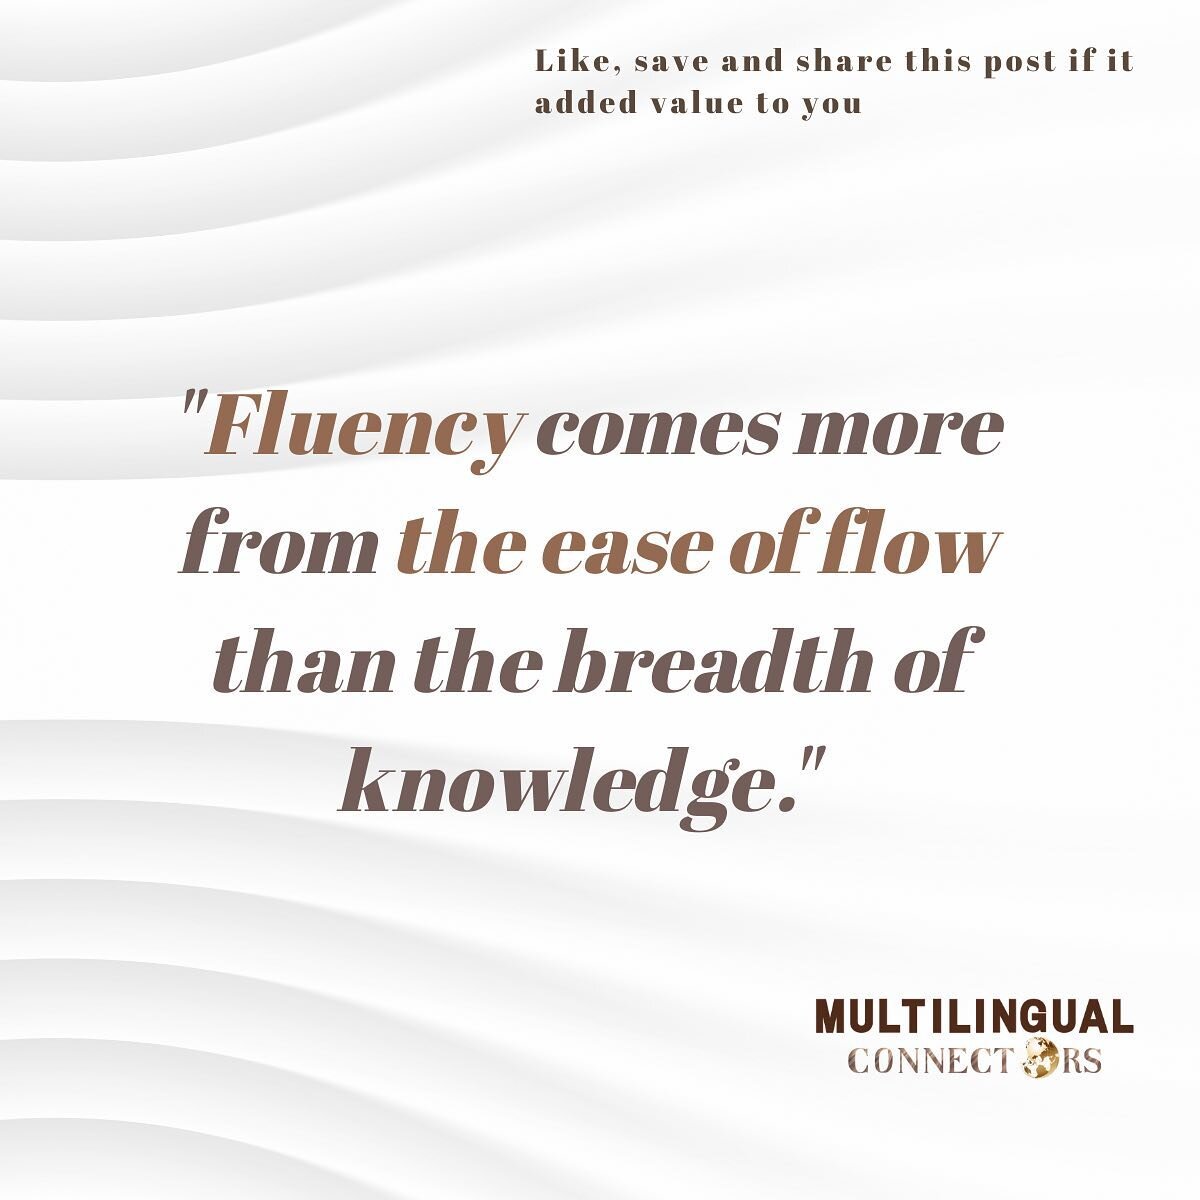 Can you have high fluency without mastery in a language? Here&rsquo;s how:

Though it&rsquo;s common to understand fluency to be almost the same as mastery of language, the word &lsquo;fluent&rsquo; itself shares a root with fluidity and flow. What d